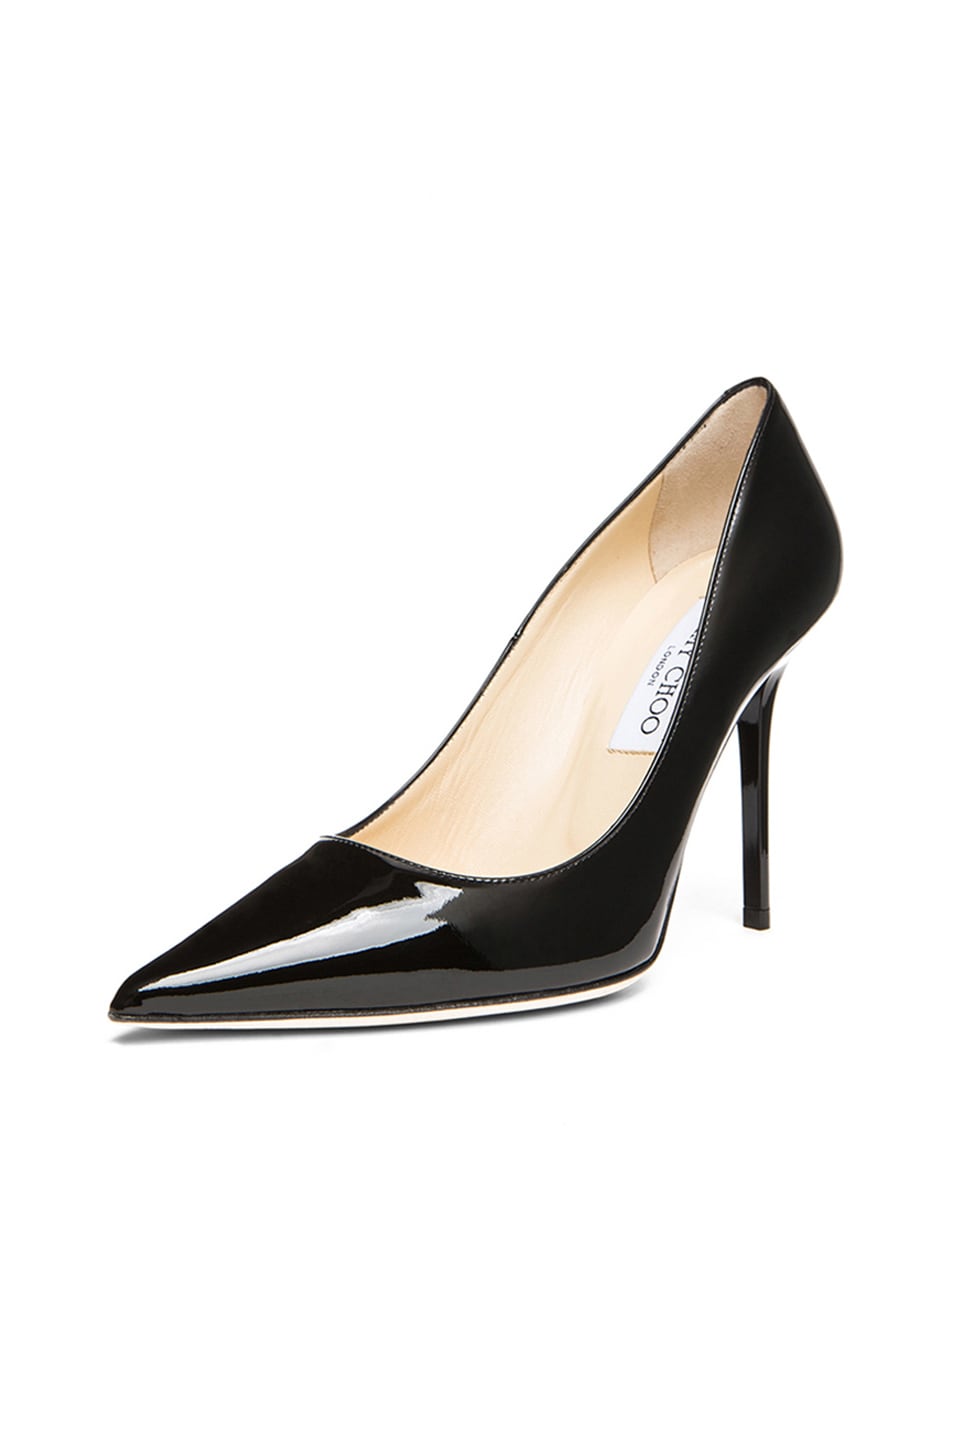 JIMMY CHOO ABEL POINTED PATENT LEATHER PUMPS